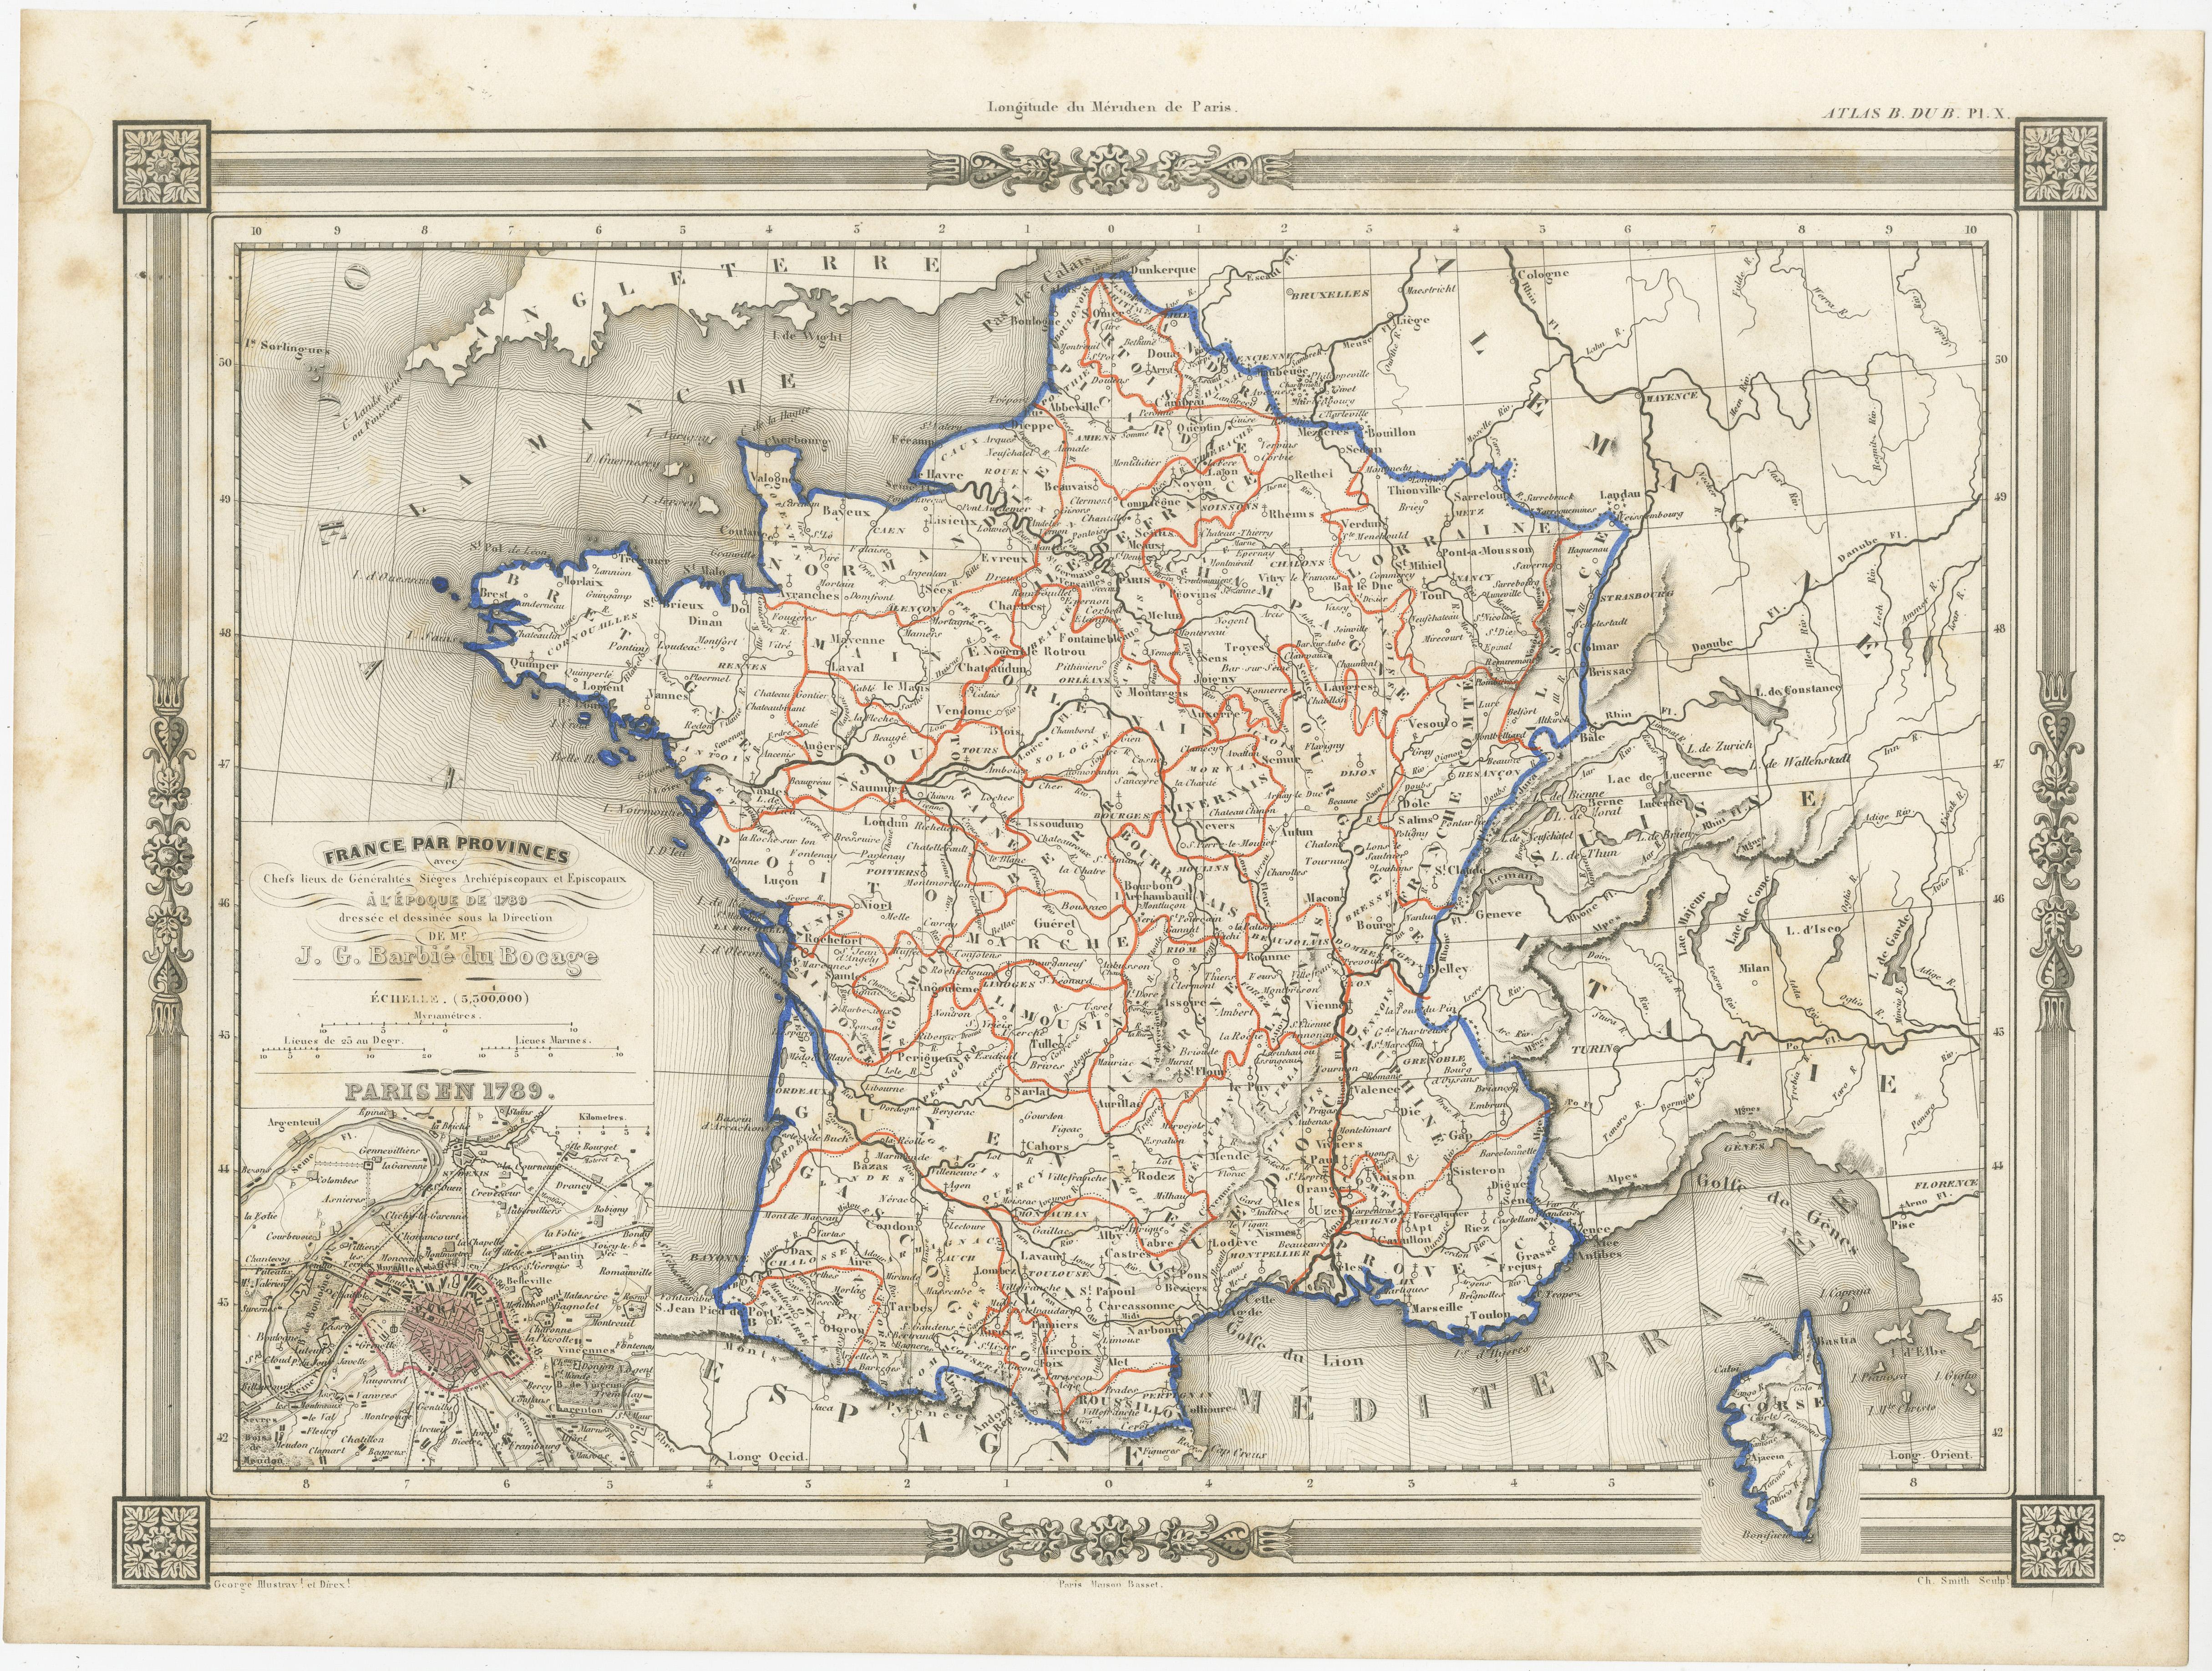 Antique map titled 'France par Provinces'. Original antique map of France in Provinces. It covers from the Flanders in the north to Roussillon in the south and from Brittany in the west to Alsace in the east. Also includes Corsica. An inset on the